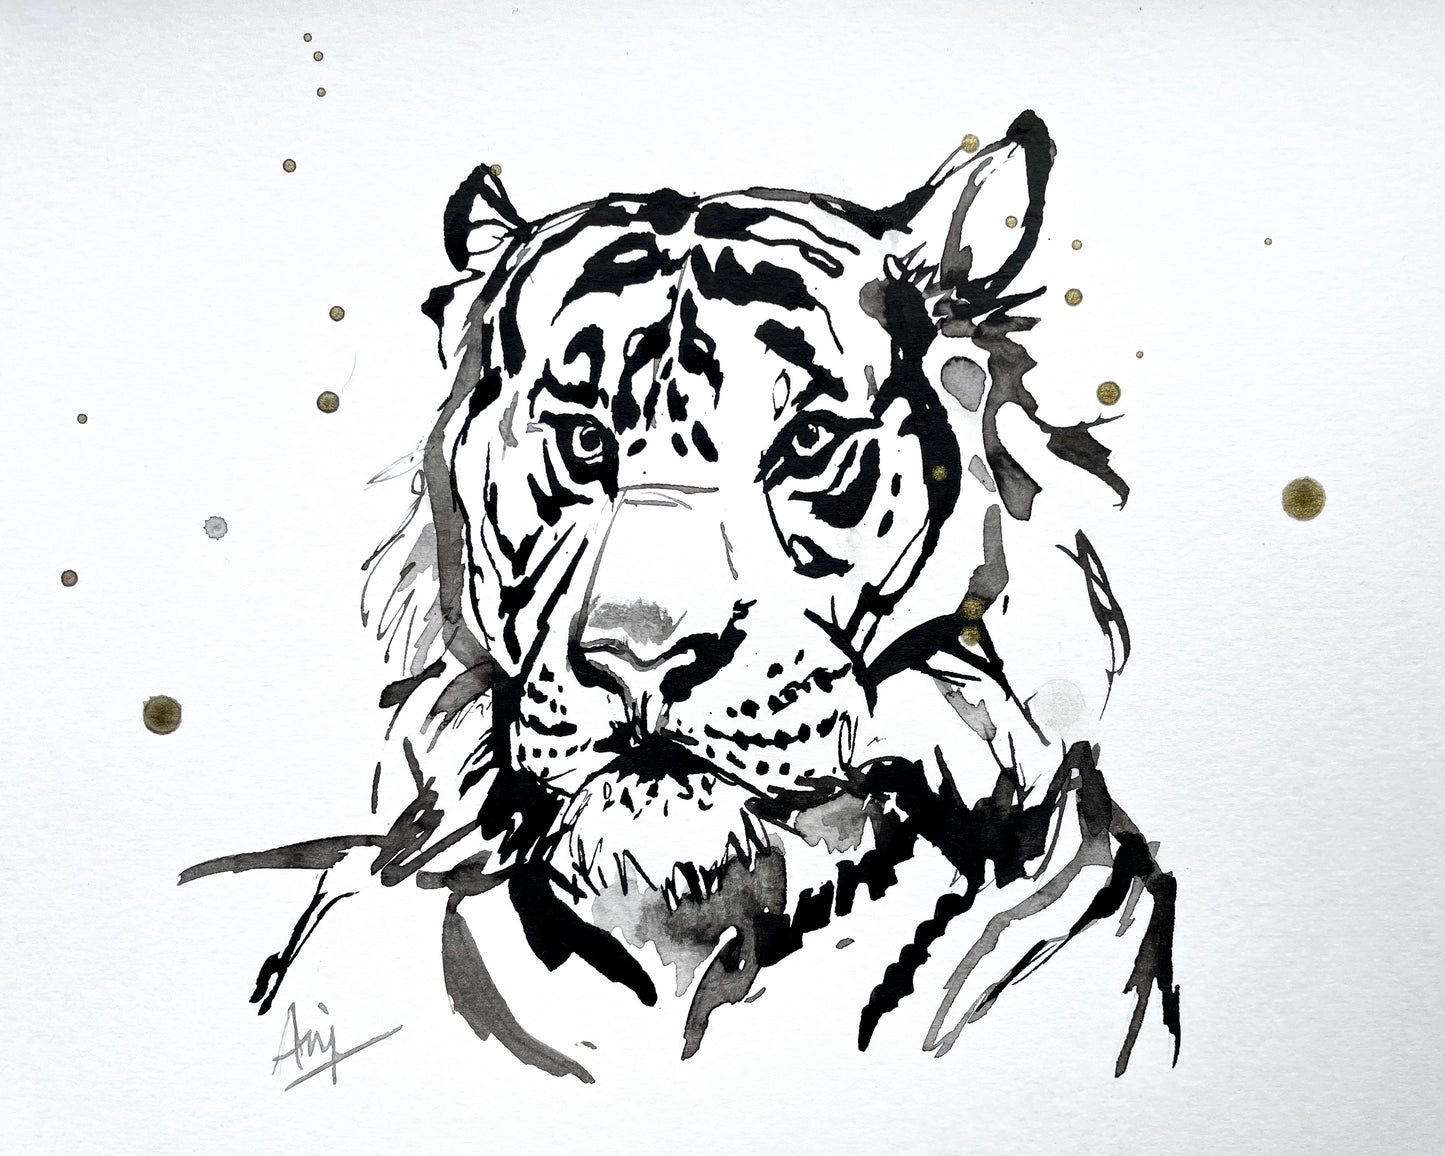 Charity Ink Sketch - Tiger Head Study